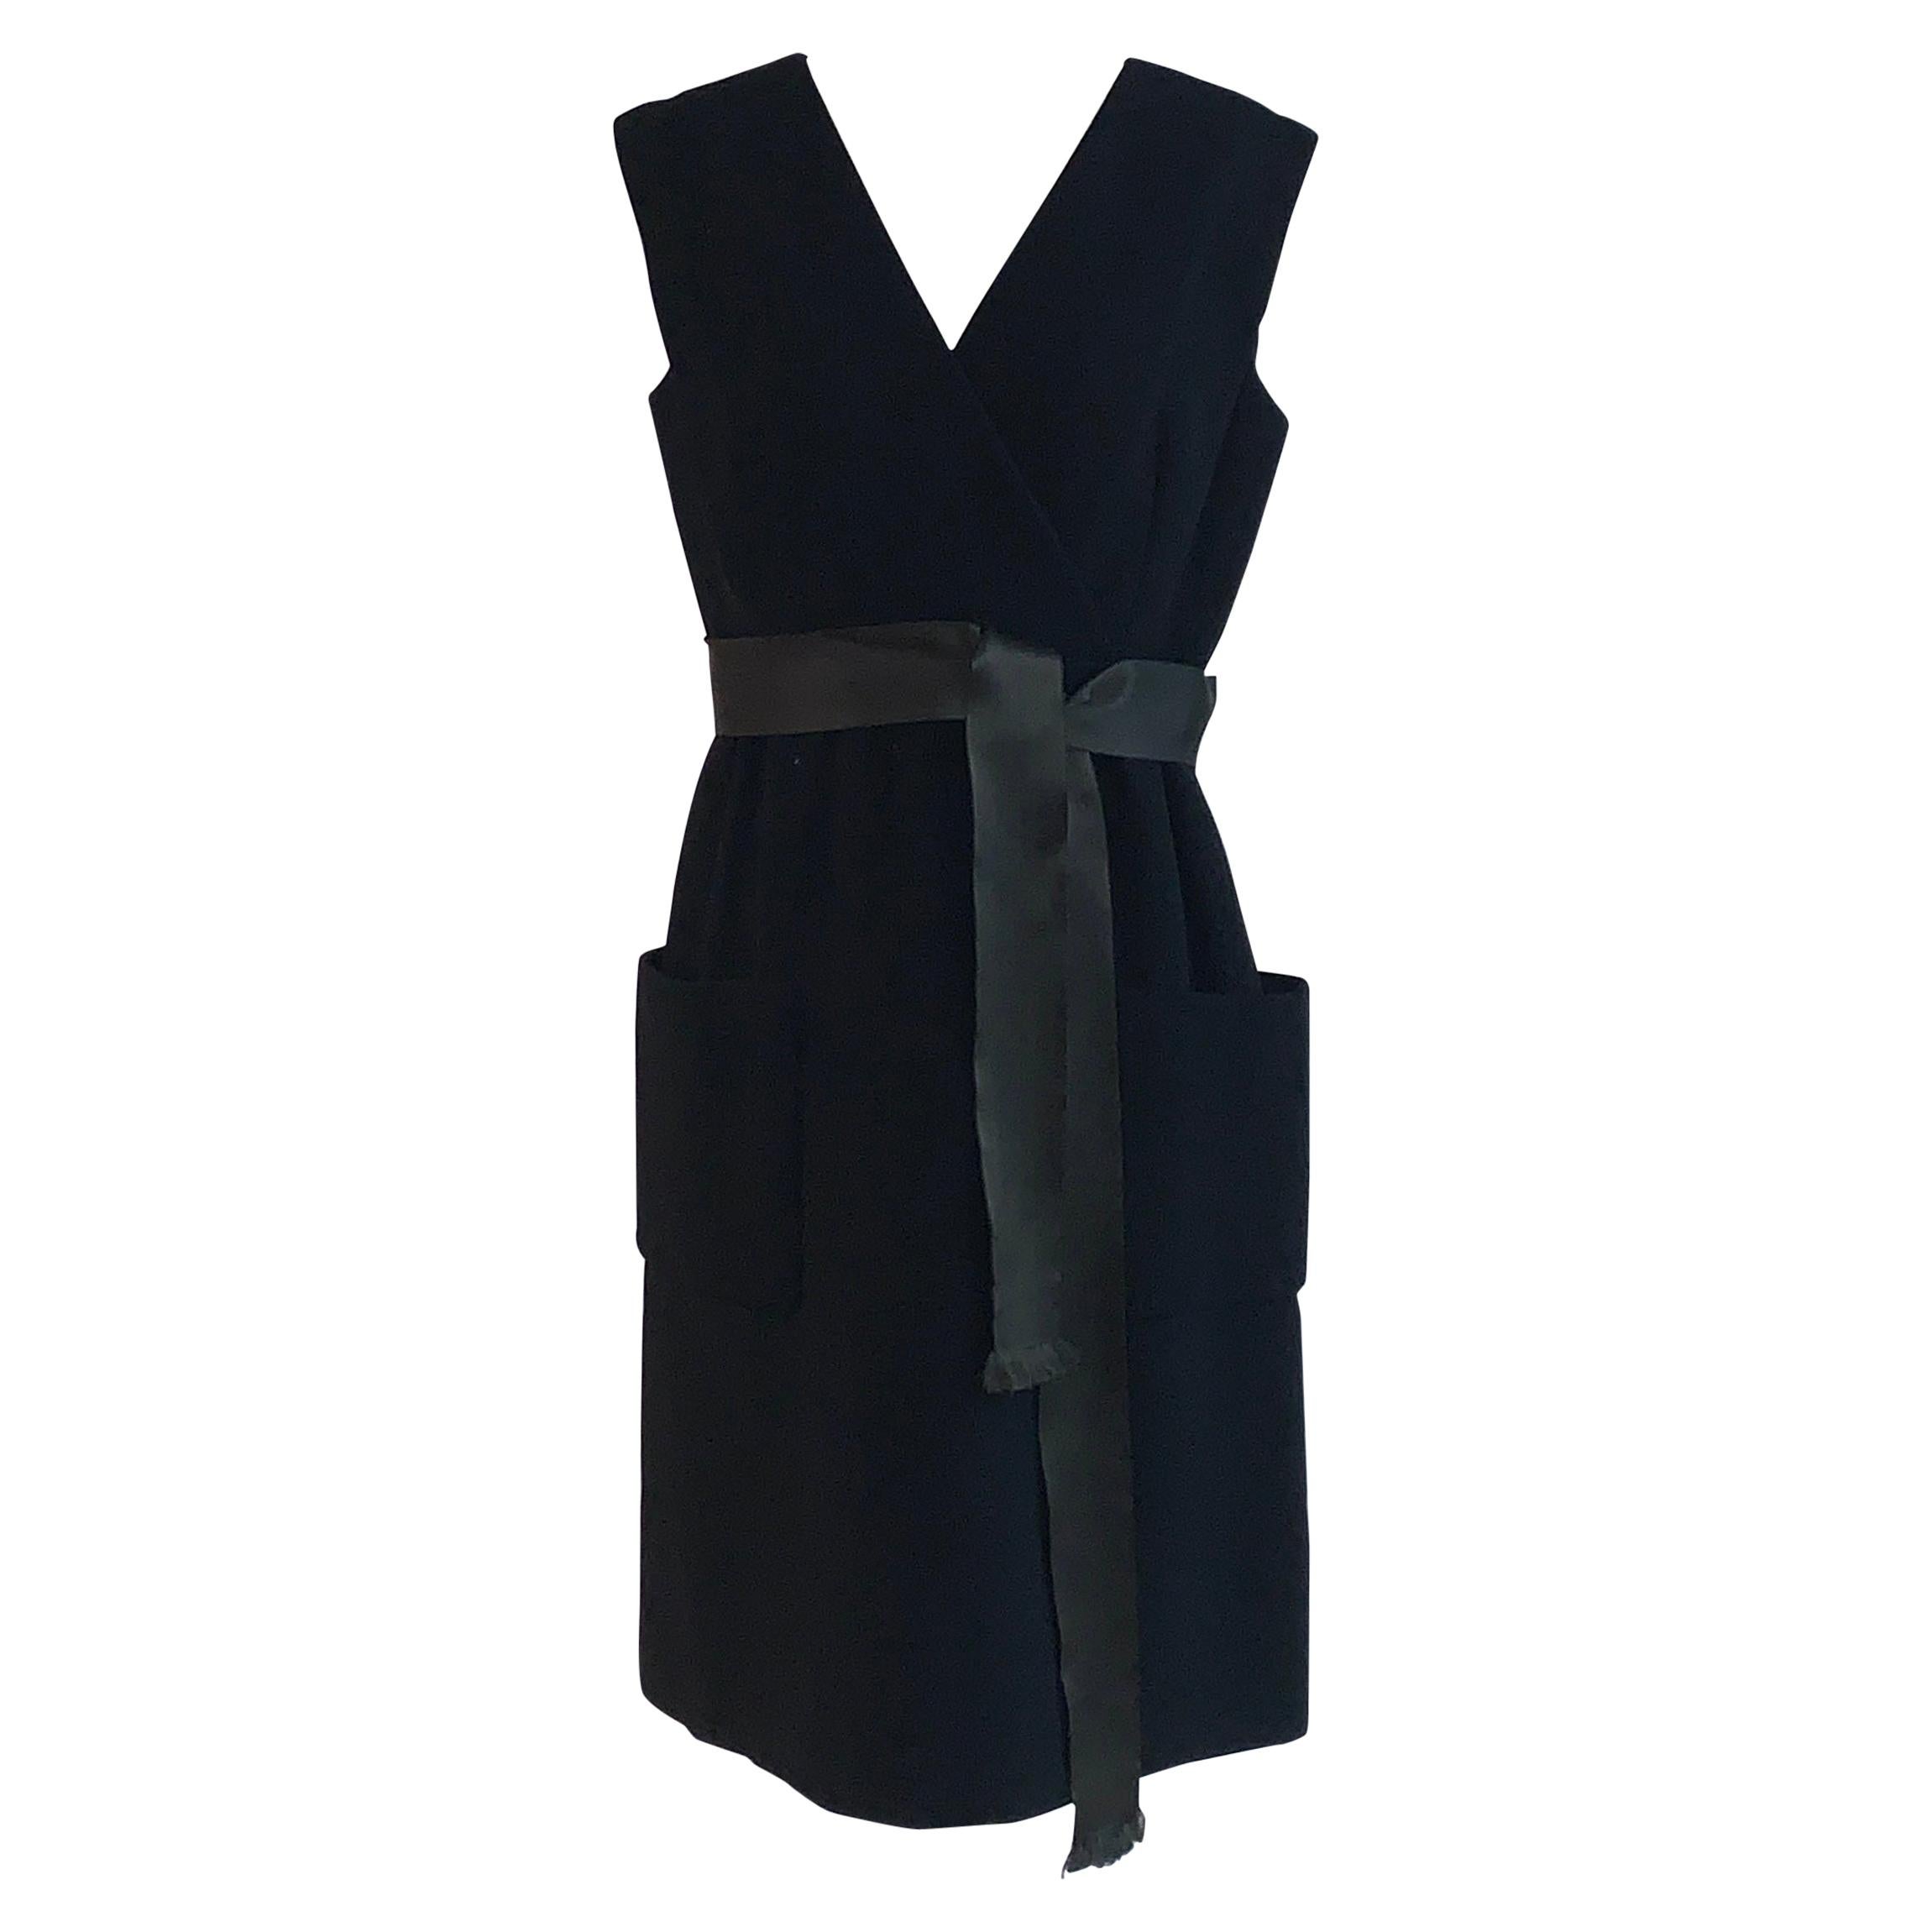 1960s Norman Norell Black Shift Dress with Patch Pockets and Ribbon Belt